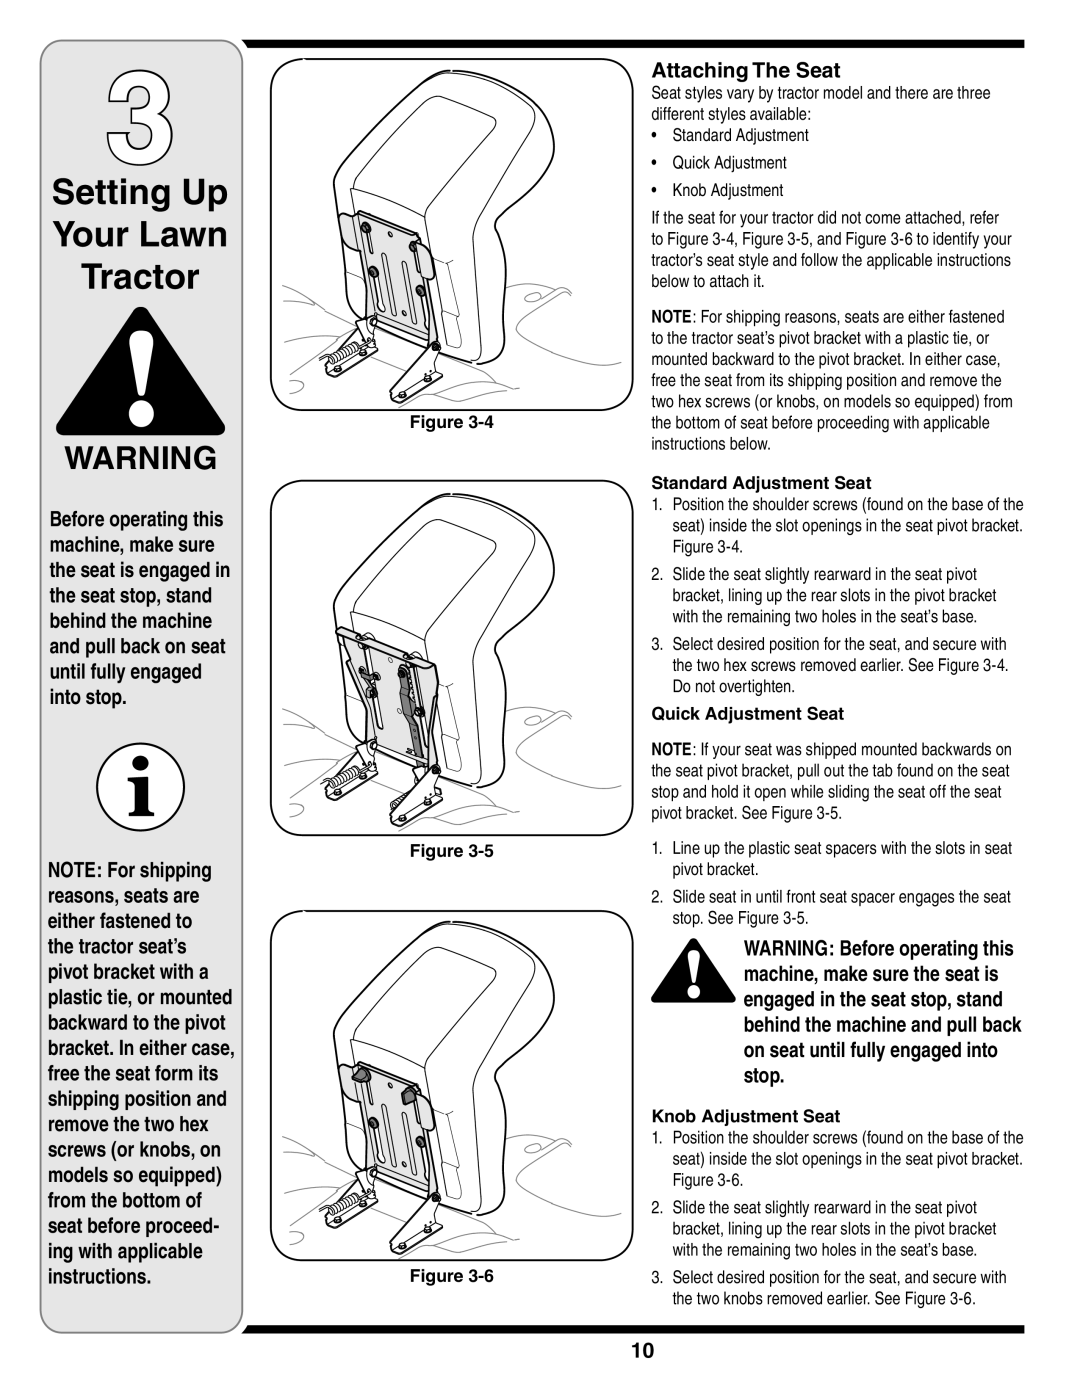 White Outdoor 606 manual Setting Up Your Lawn Tractor, Attaching The Seat, Standard Adjustment Seat, Quick Adjustment Seat 